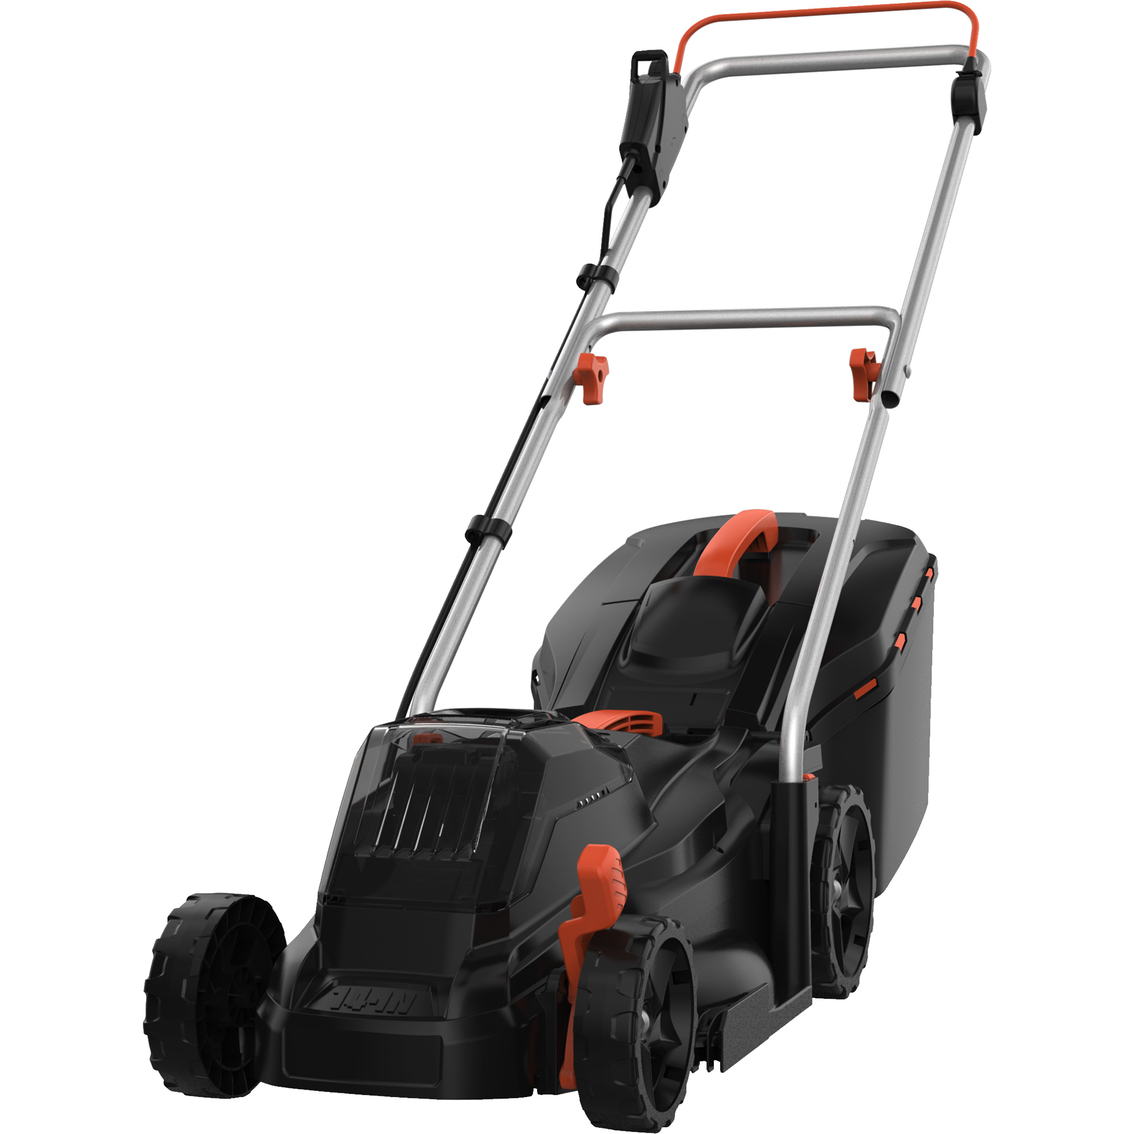 Scotts 20 Volt Lithium 14 in. Lawn Mower - Image 3 of 10